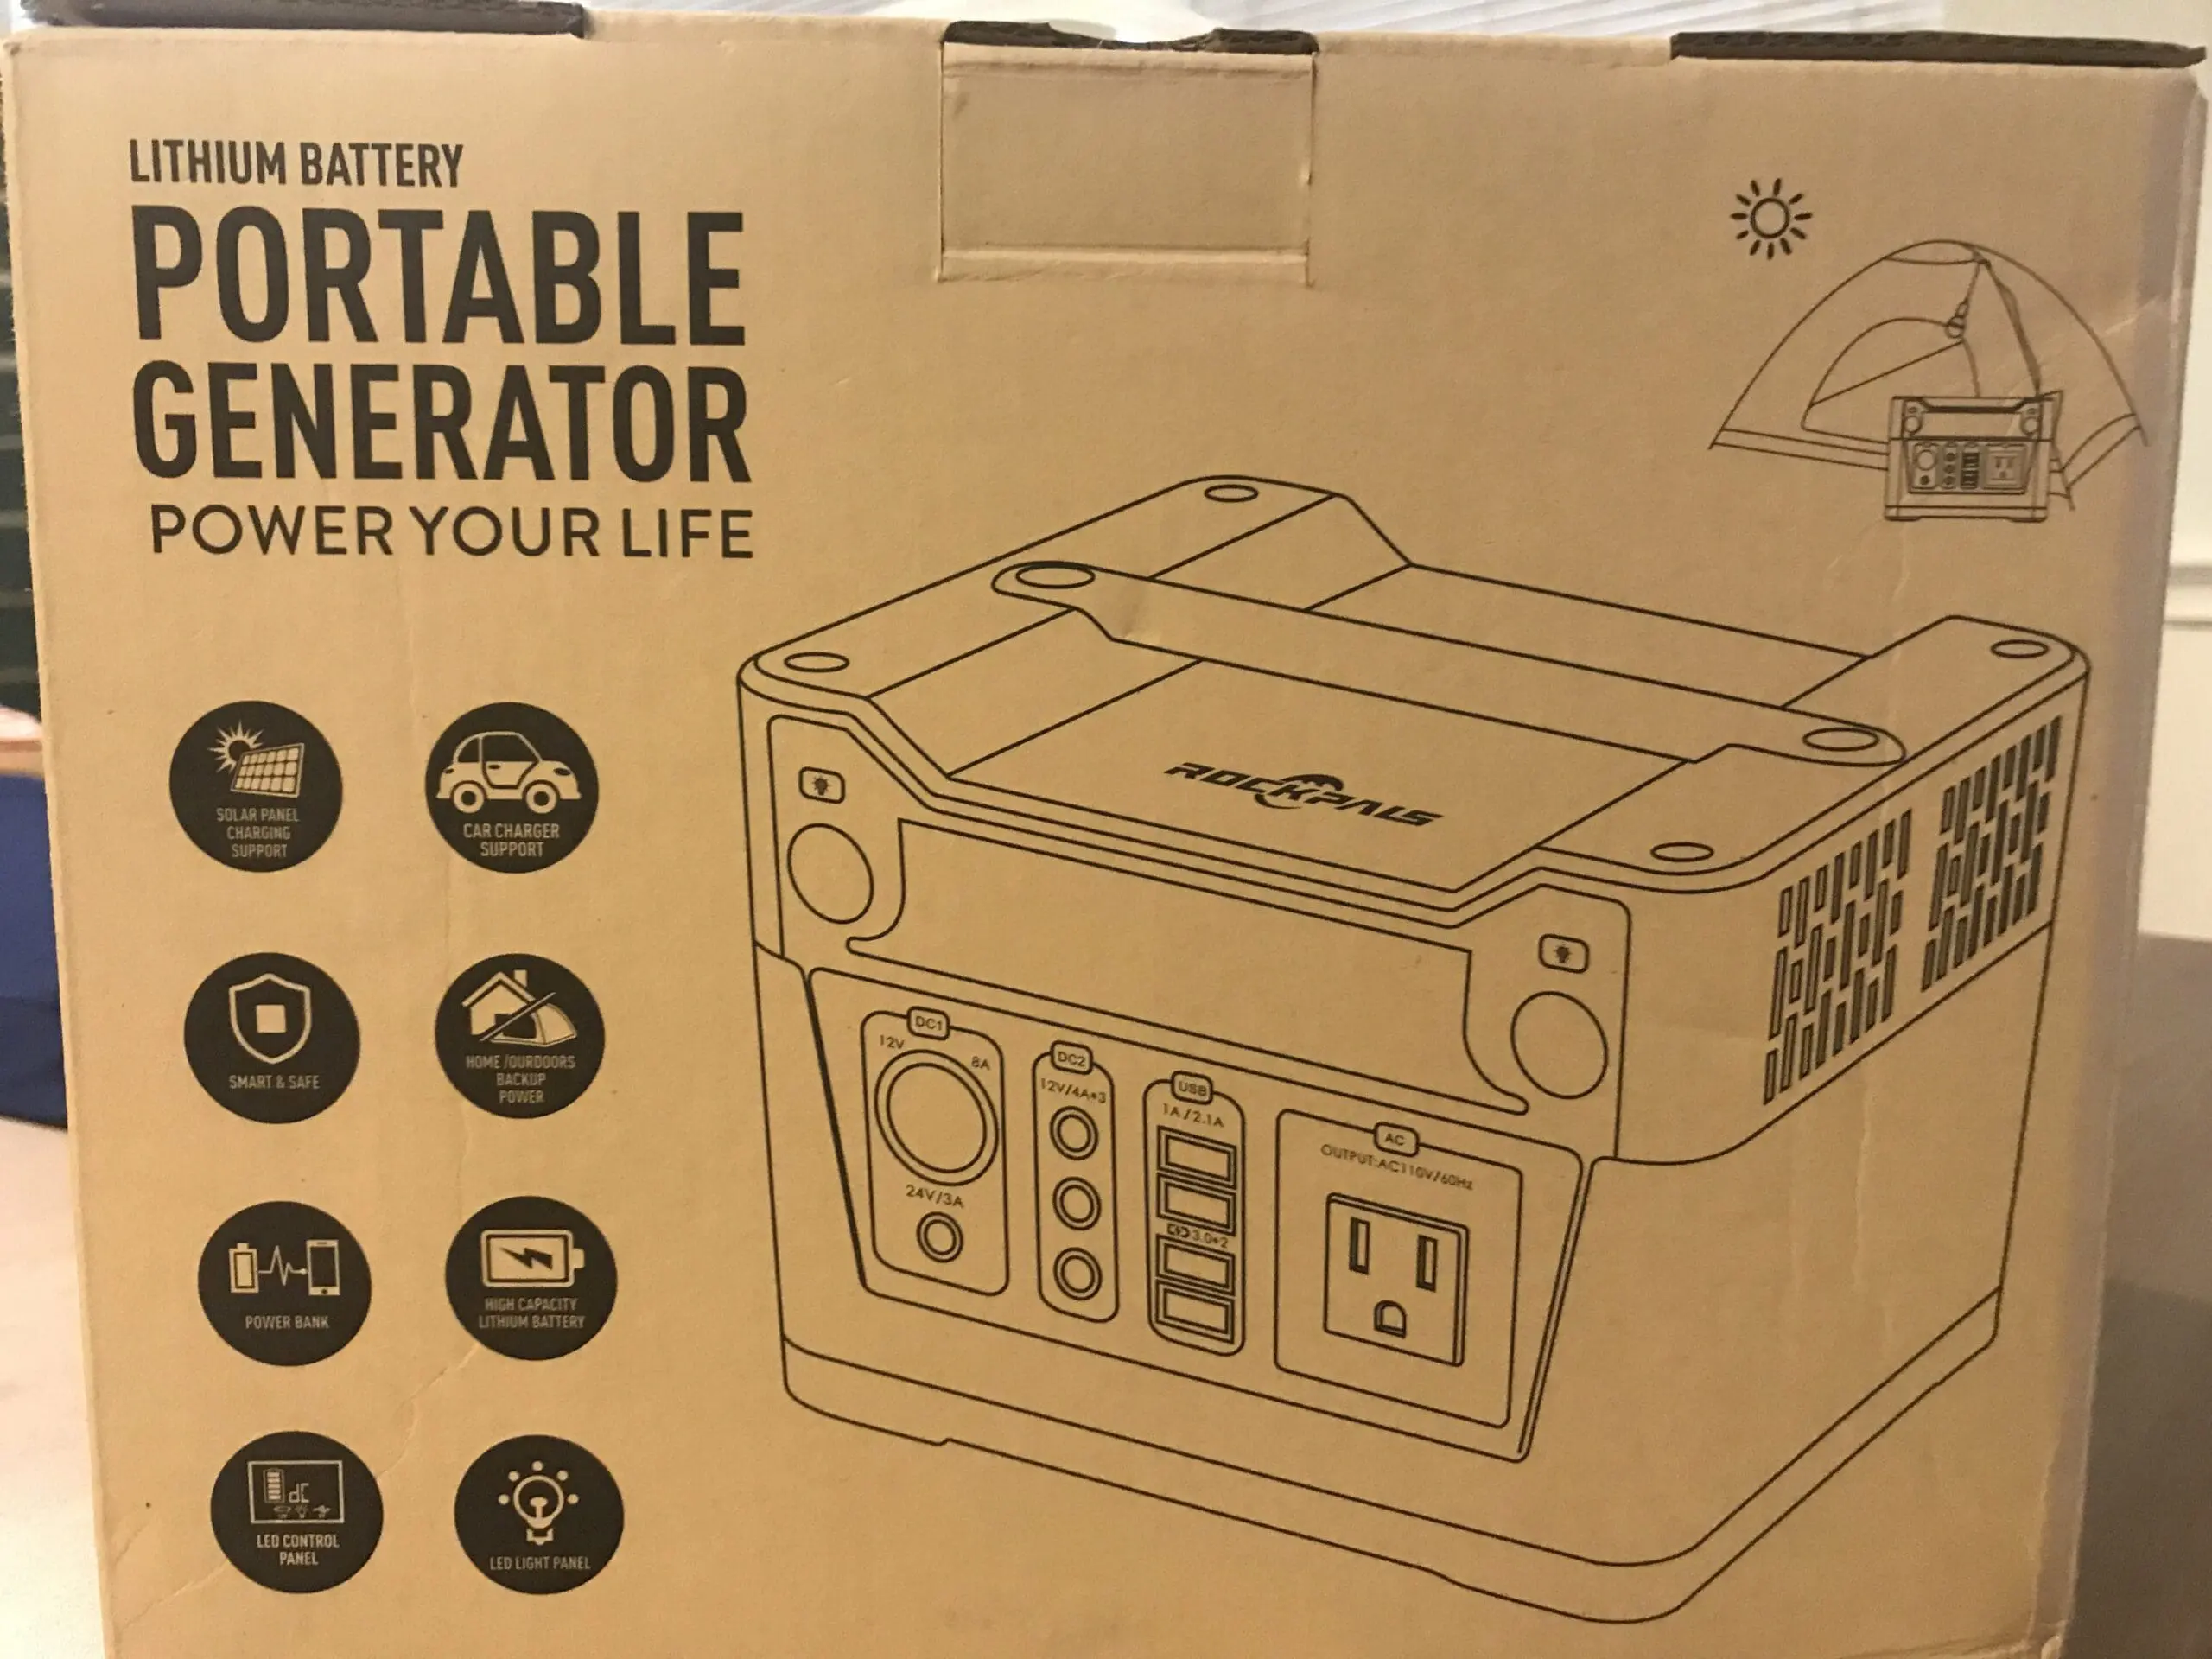 Rockpals Lithium Battery Portable Generator unboxing